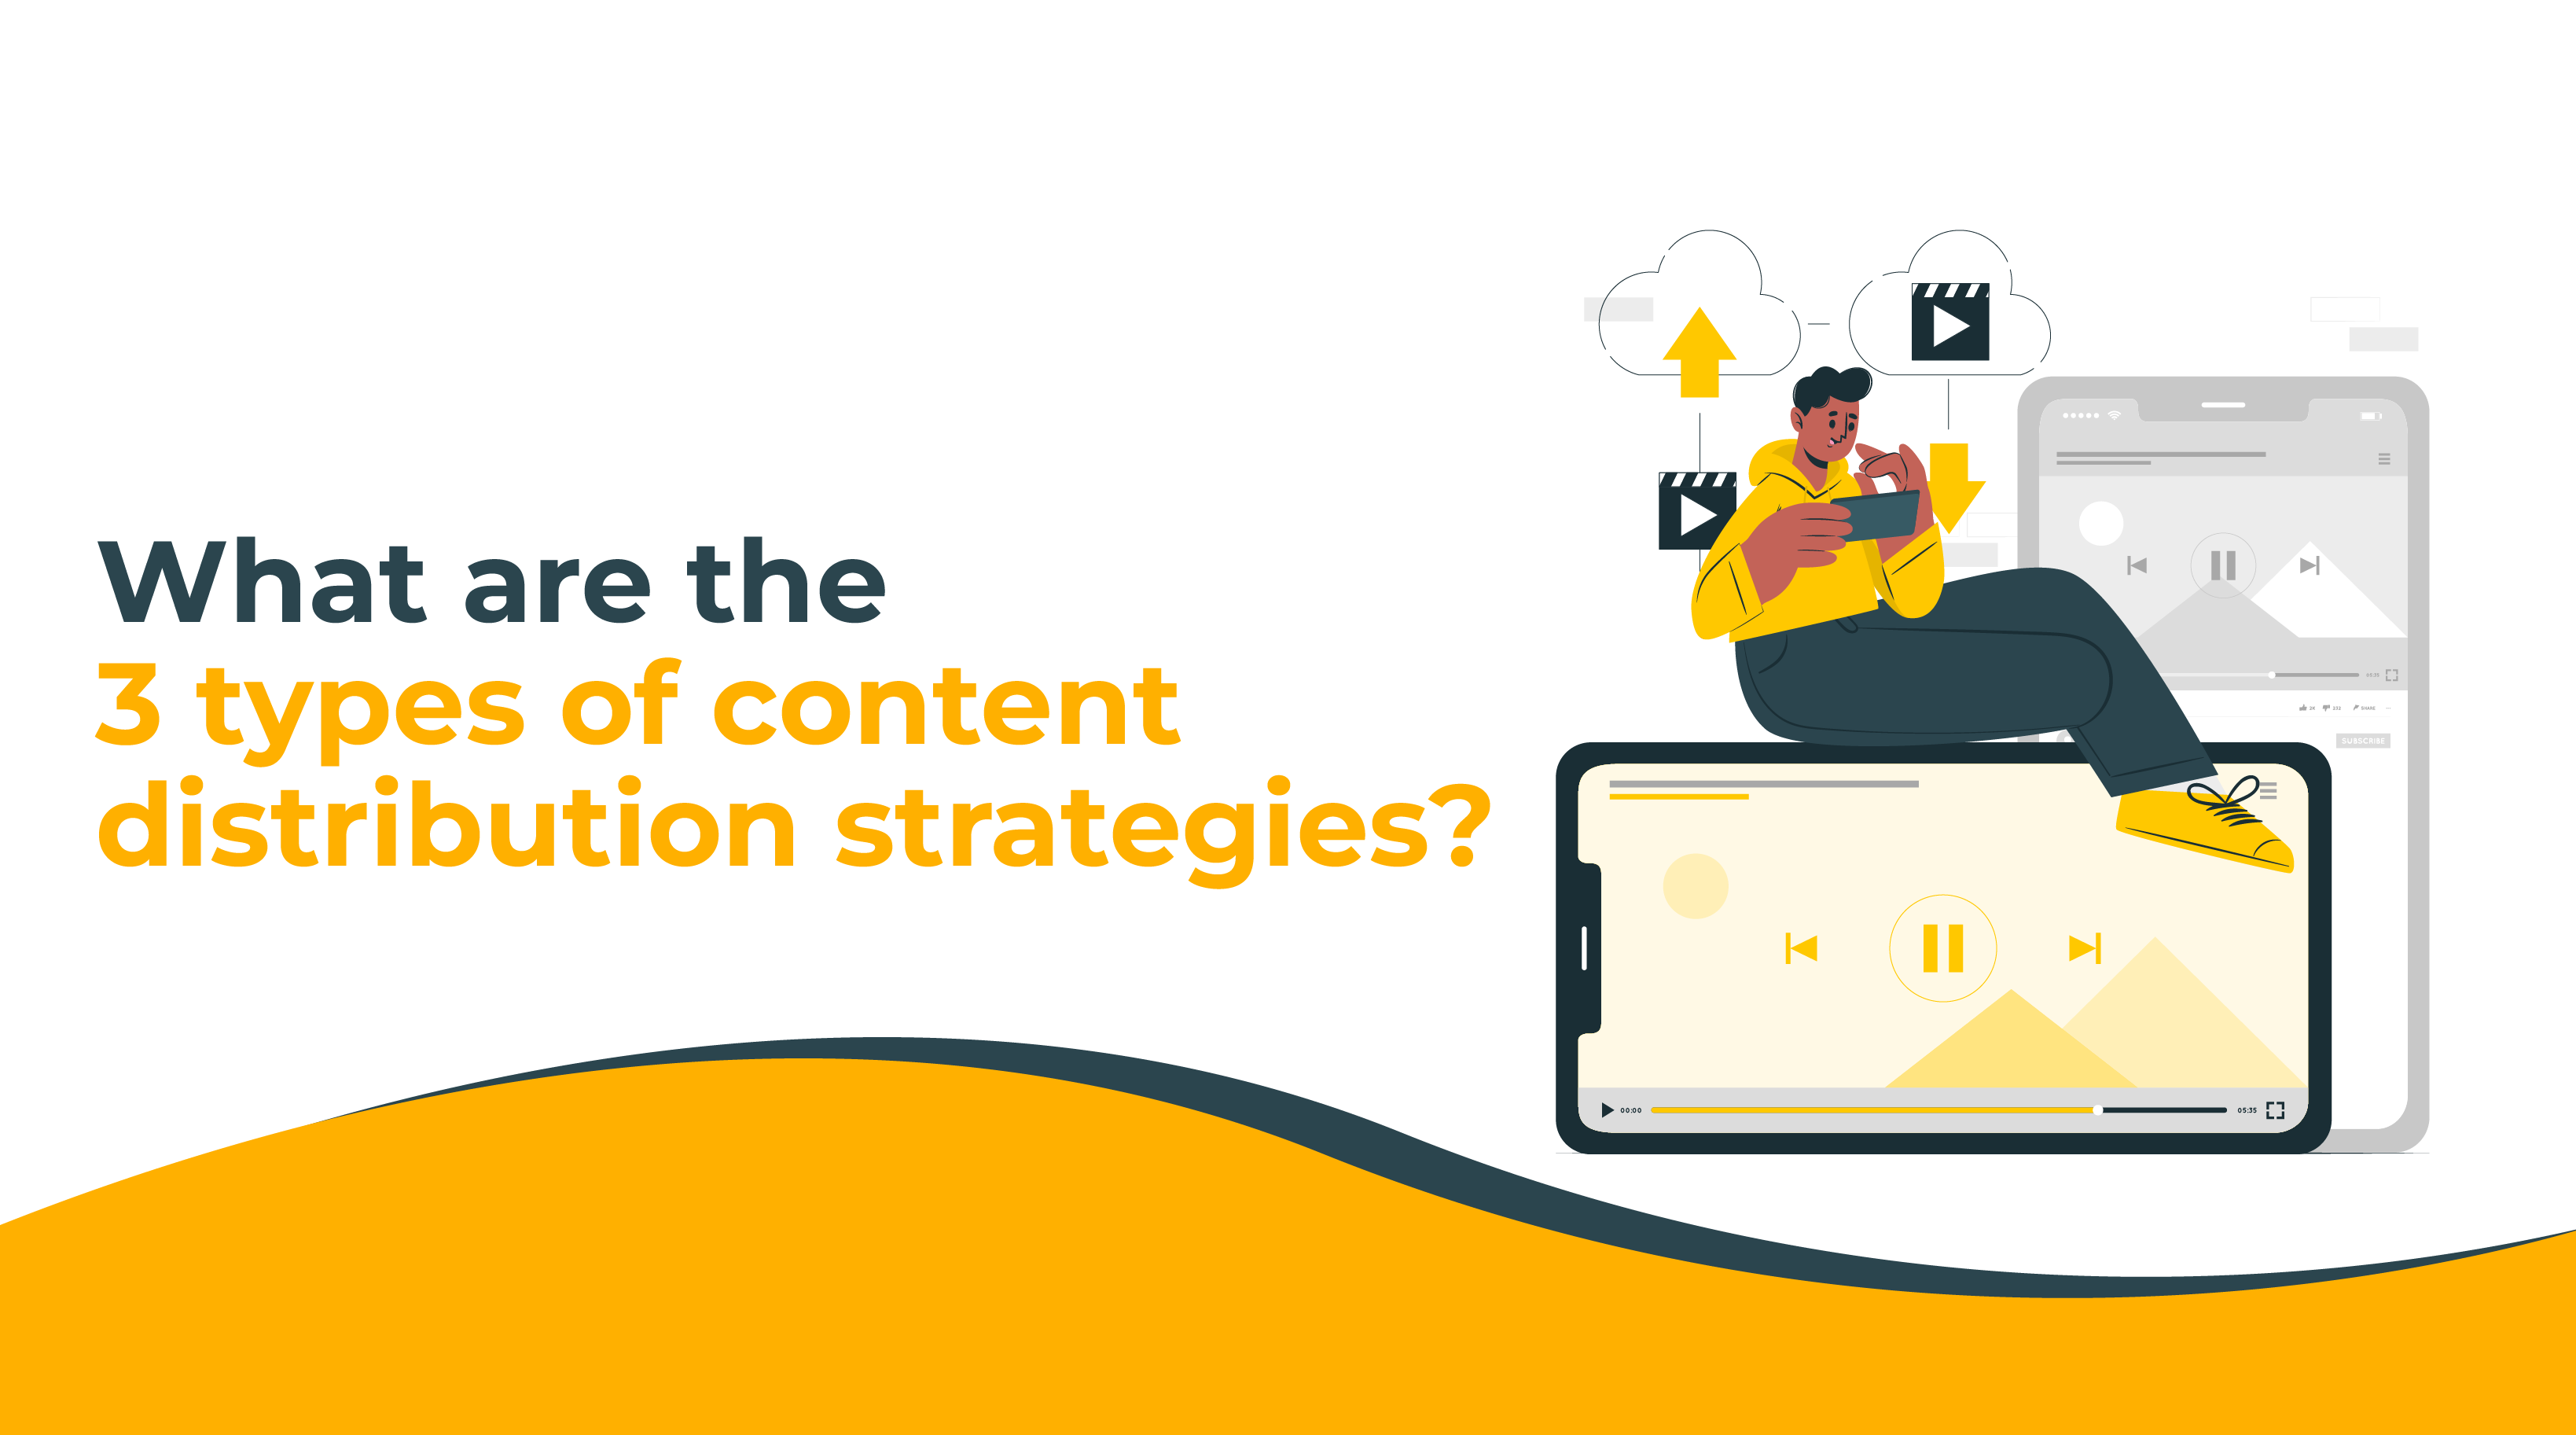 3 Types of Content Distribution Strategies